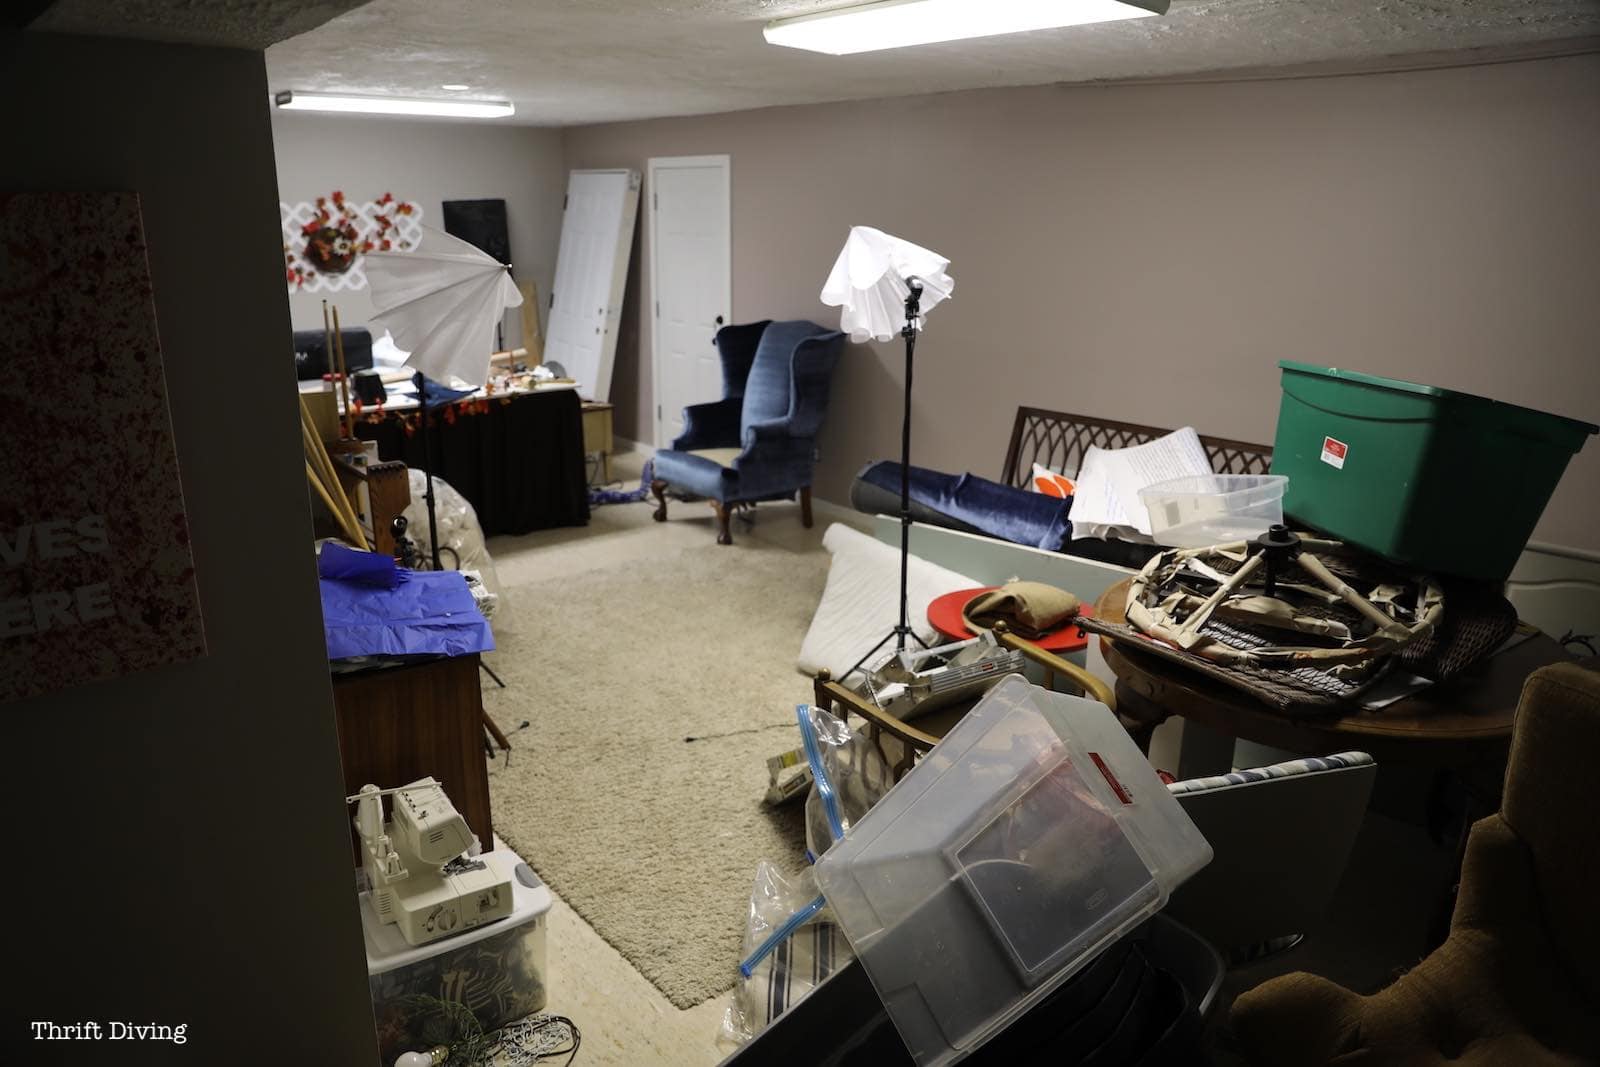 Big basement needs new flooring and rugs and paint. - Thrift Diving